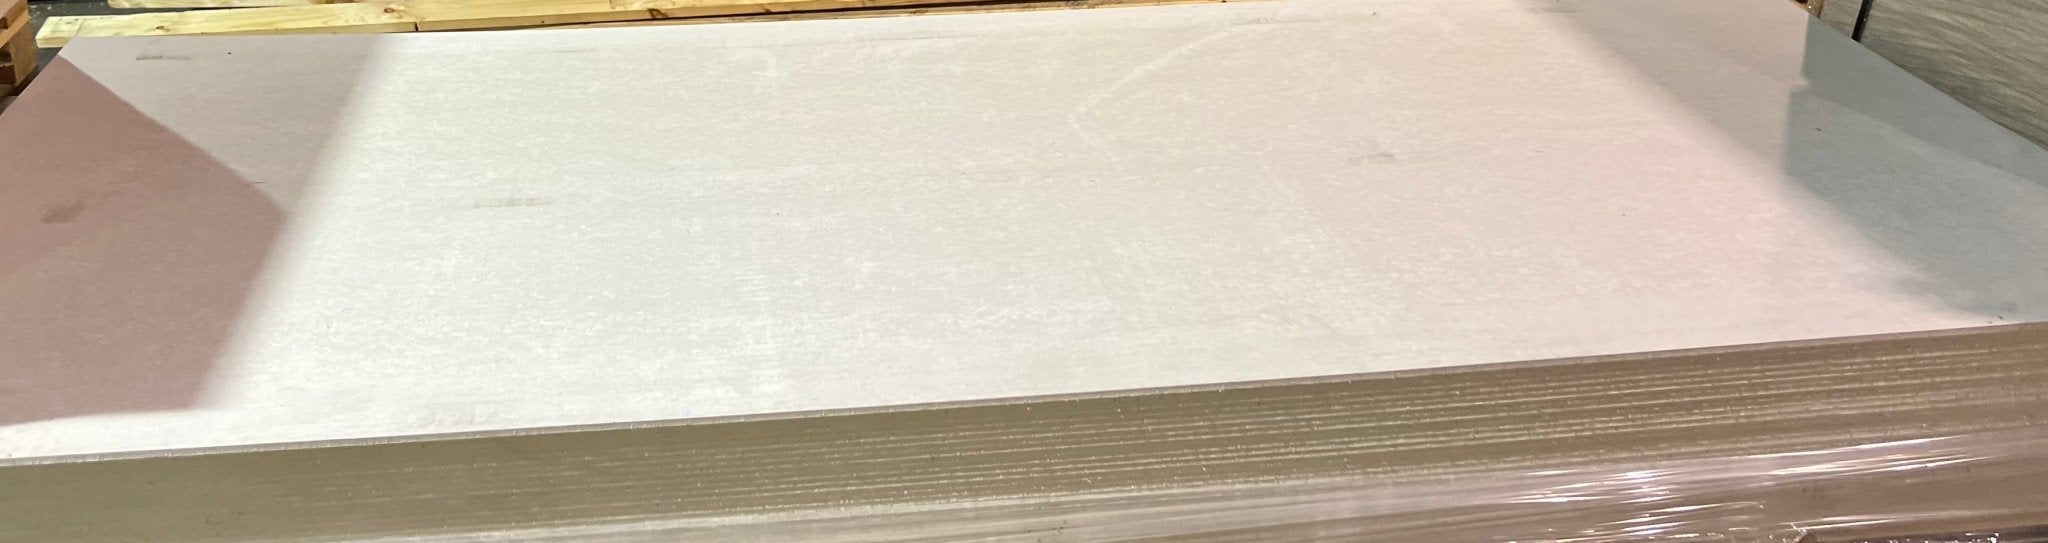 Smooth Fibre Cement Sheets - Surplus Traders Australia Buy Smooth Fibre Cement Sheets for only A$55.00 at Surplus Traders Australia!